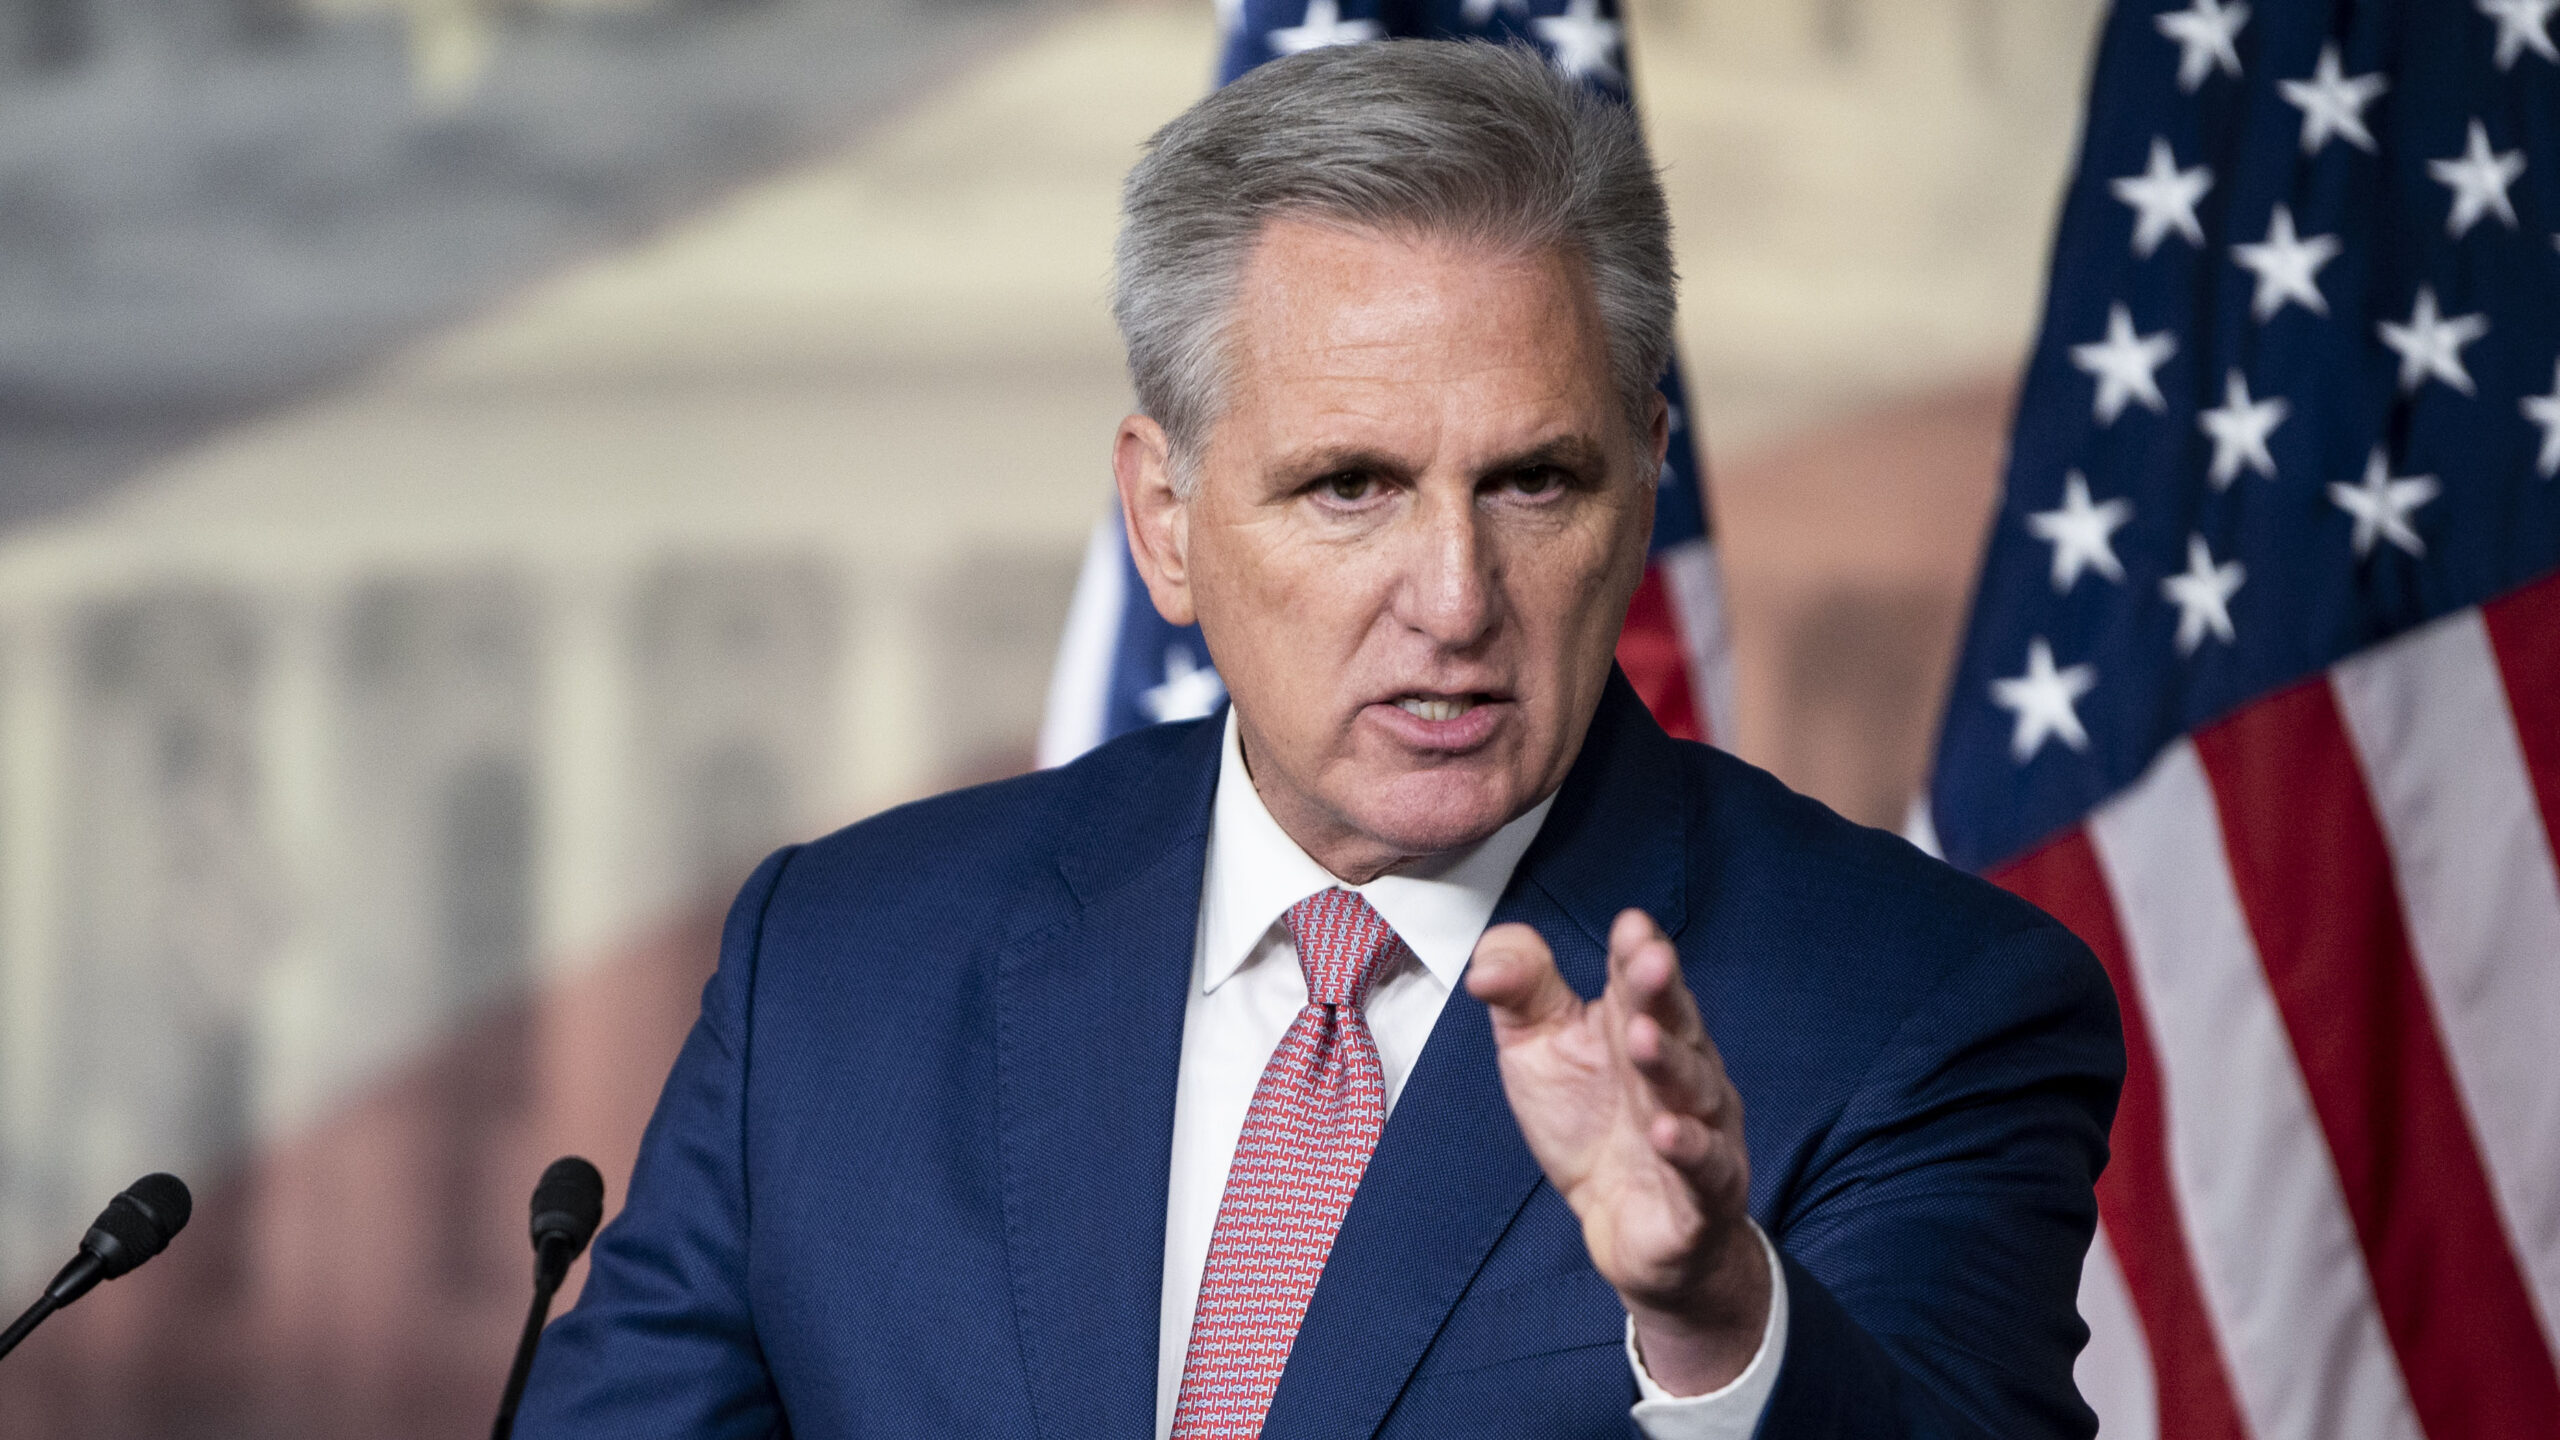 McCarthy Unveils New ‘Commitment To America’ Agenda That GOP Will Pursue If They Retake House